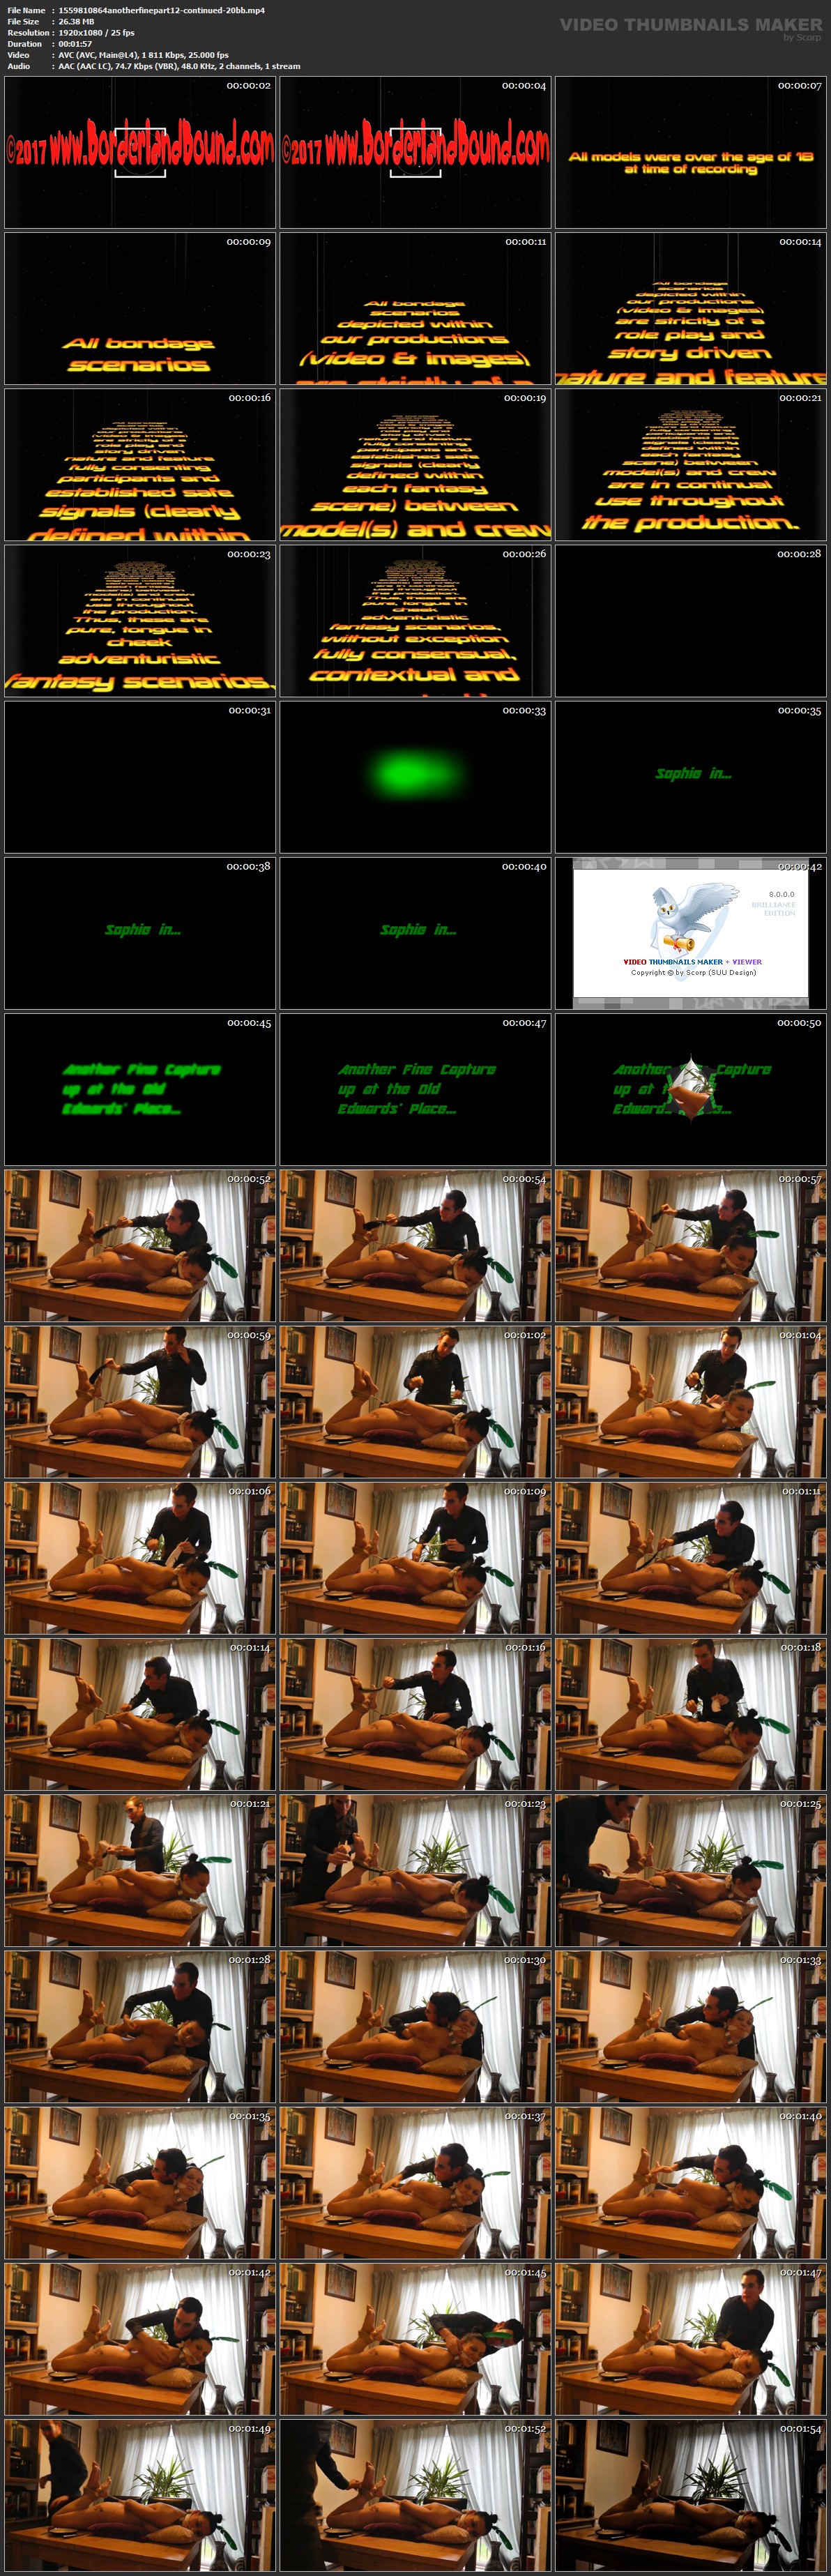 1559810864 anotherfinepart 12 continued 20 bb mp 4